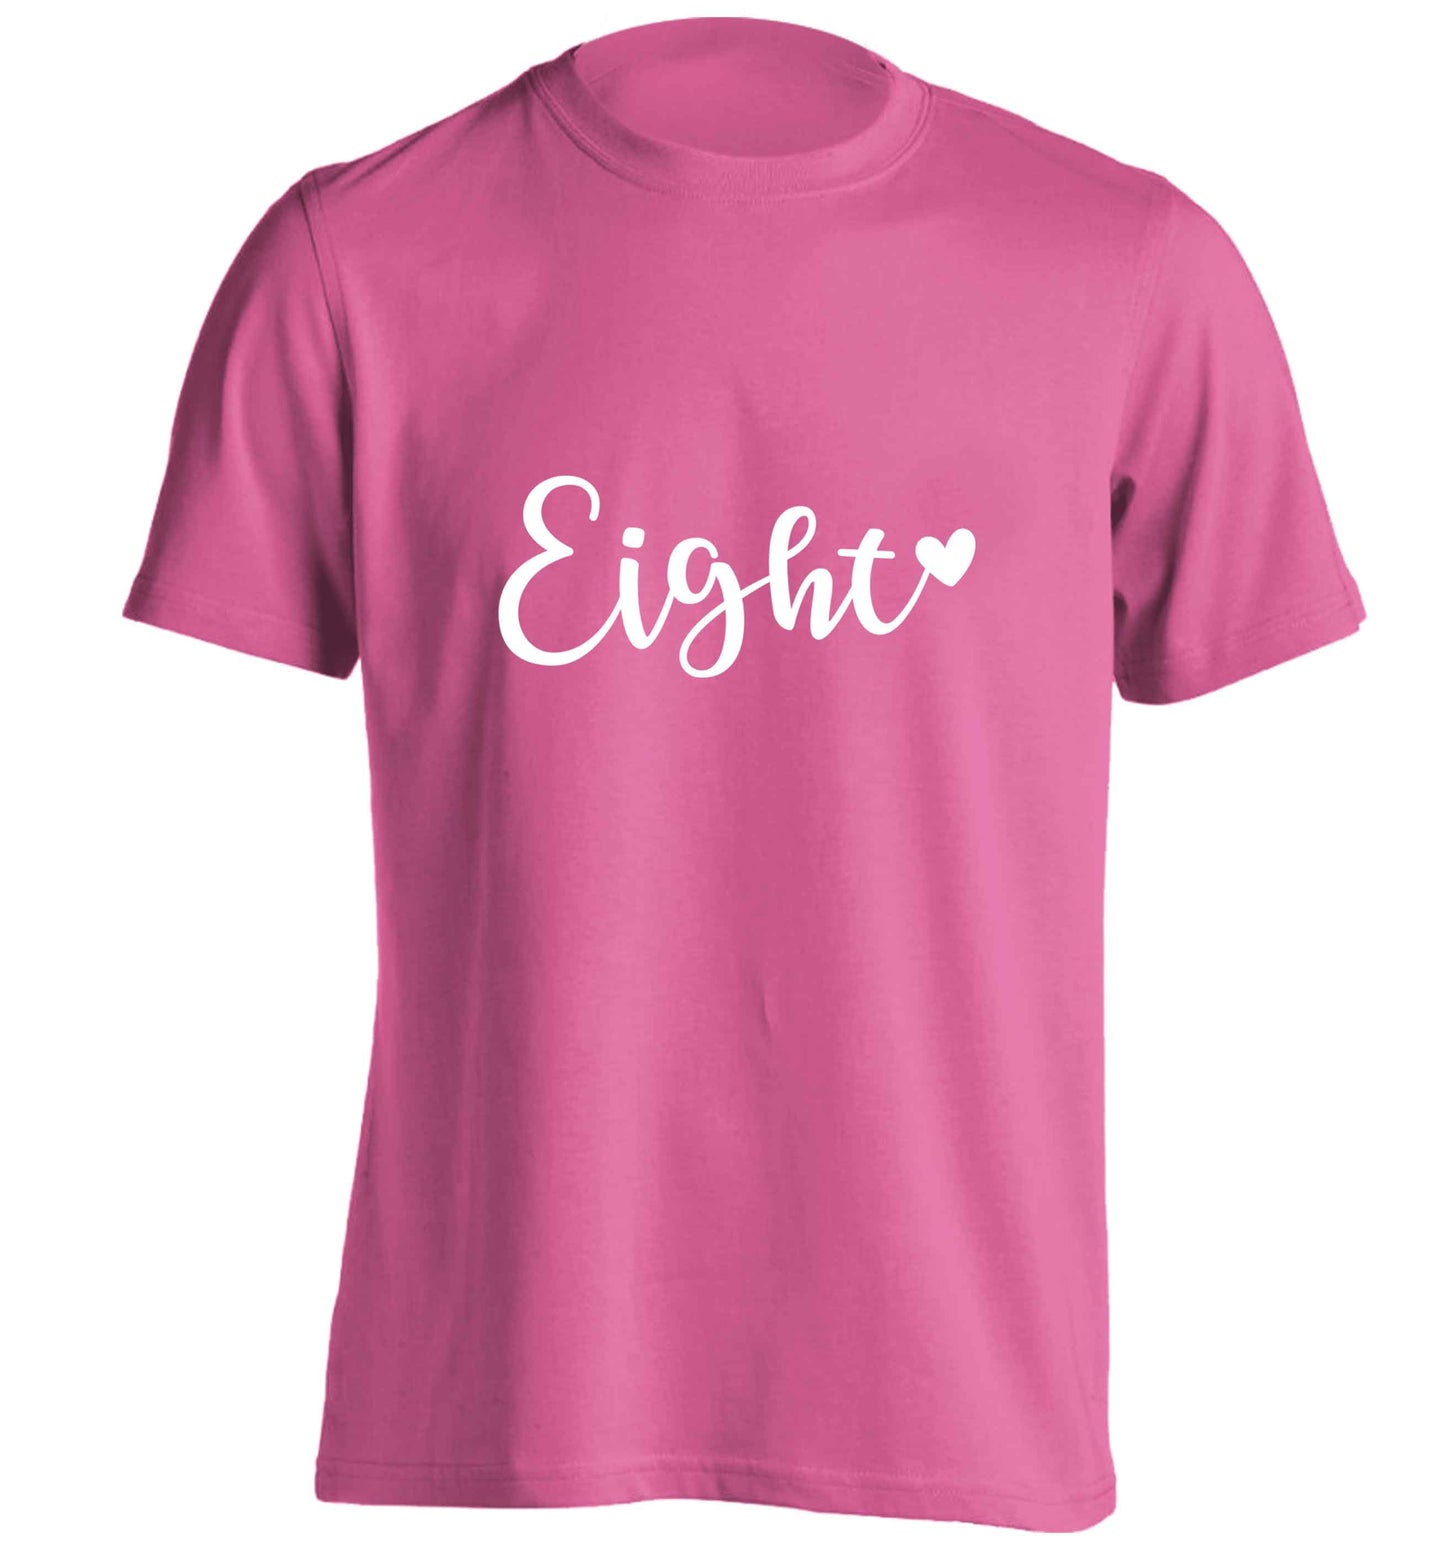 Eight and heart adults unisex pink Tshirt 2XL